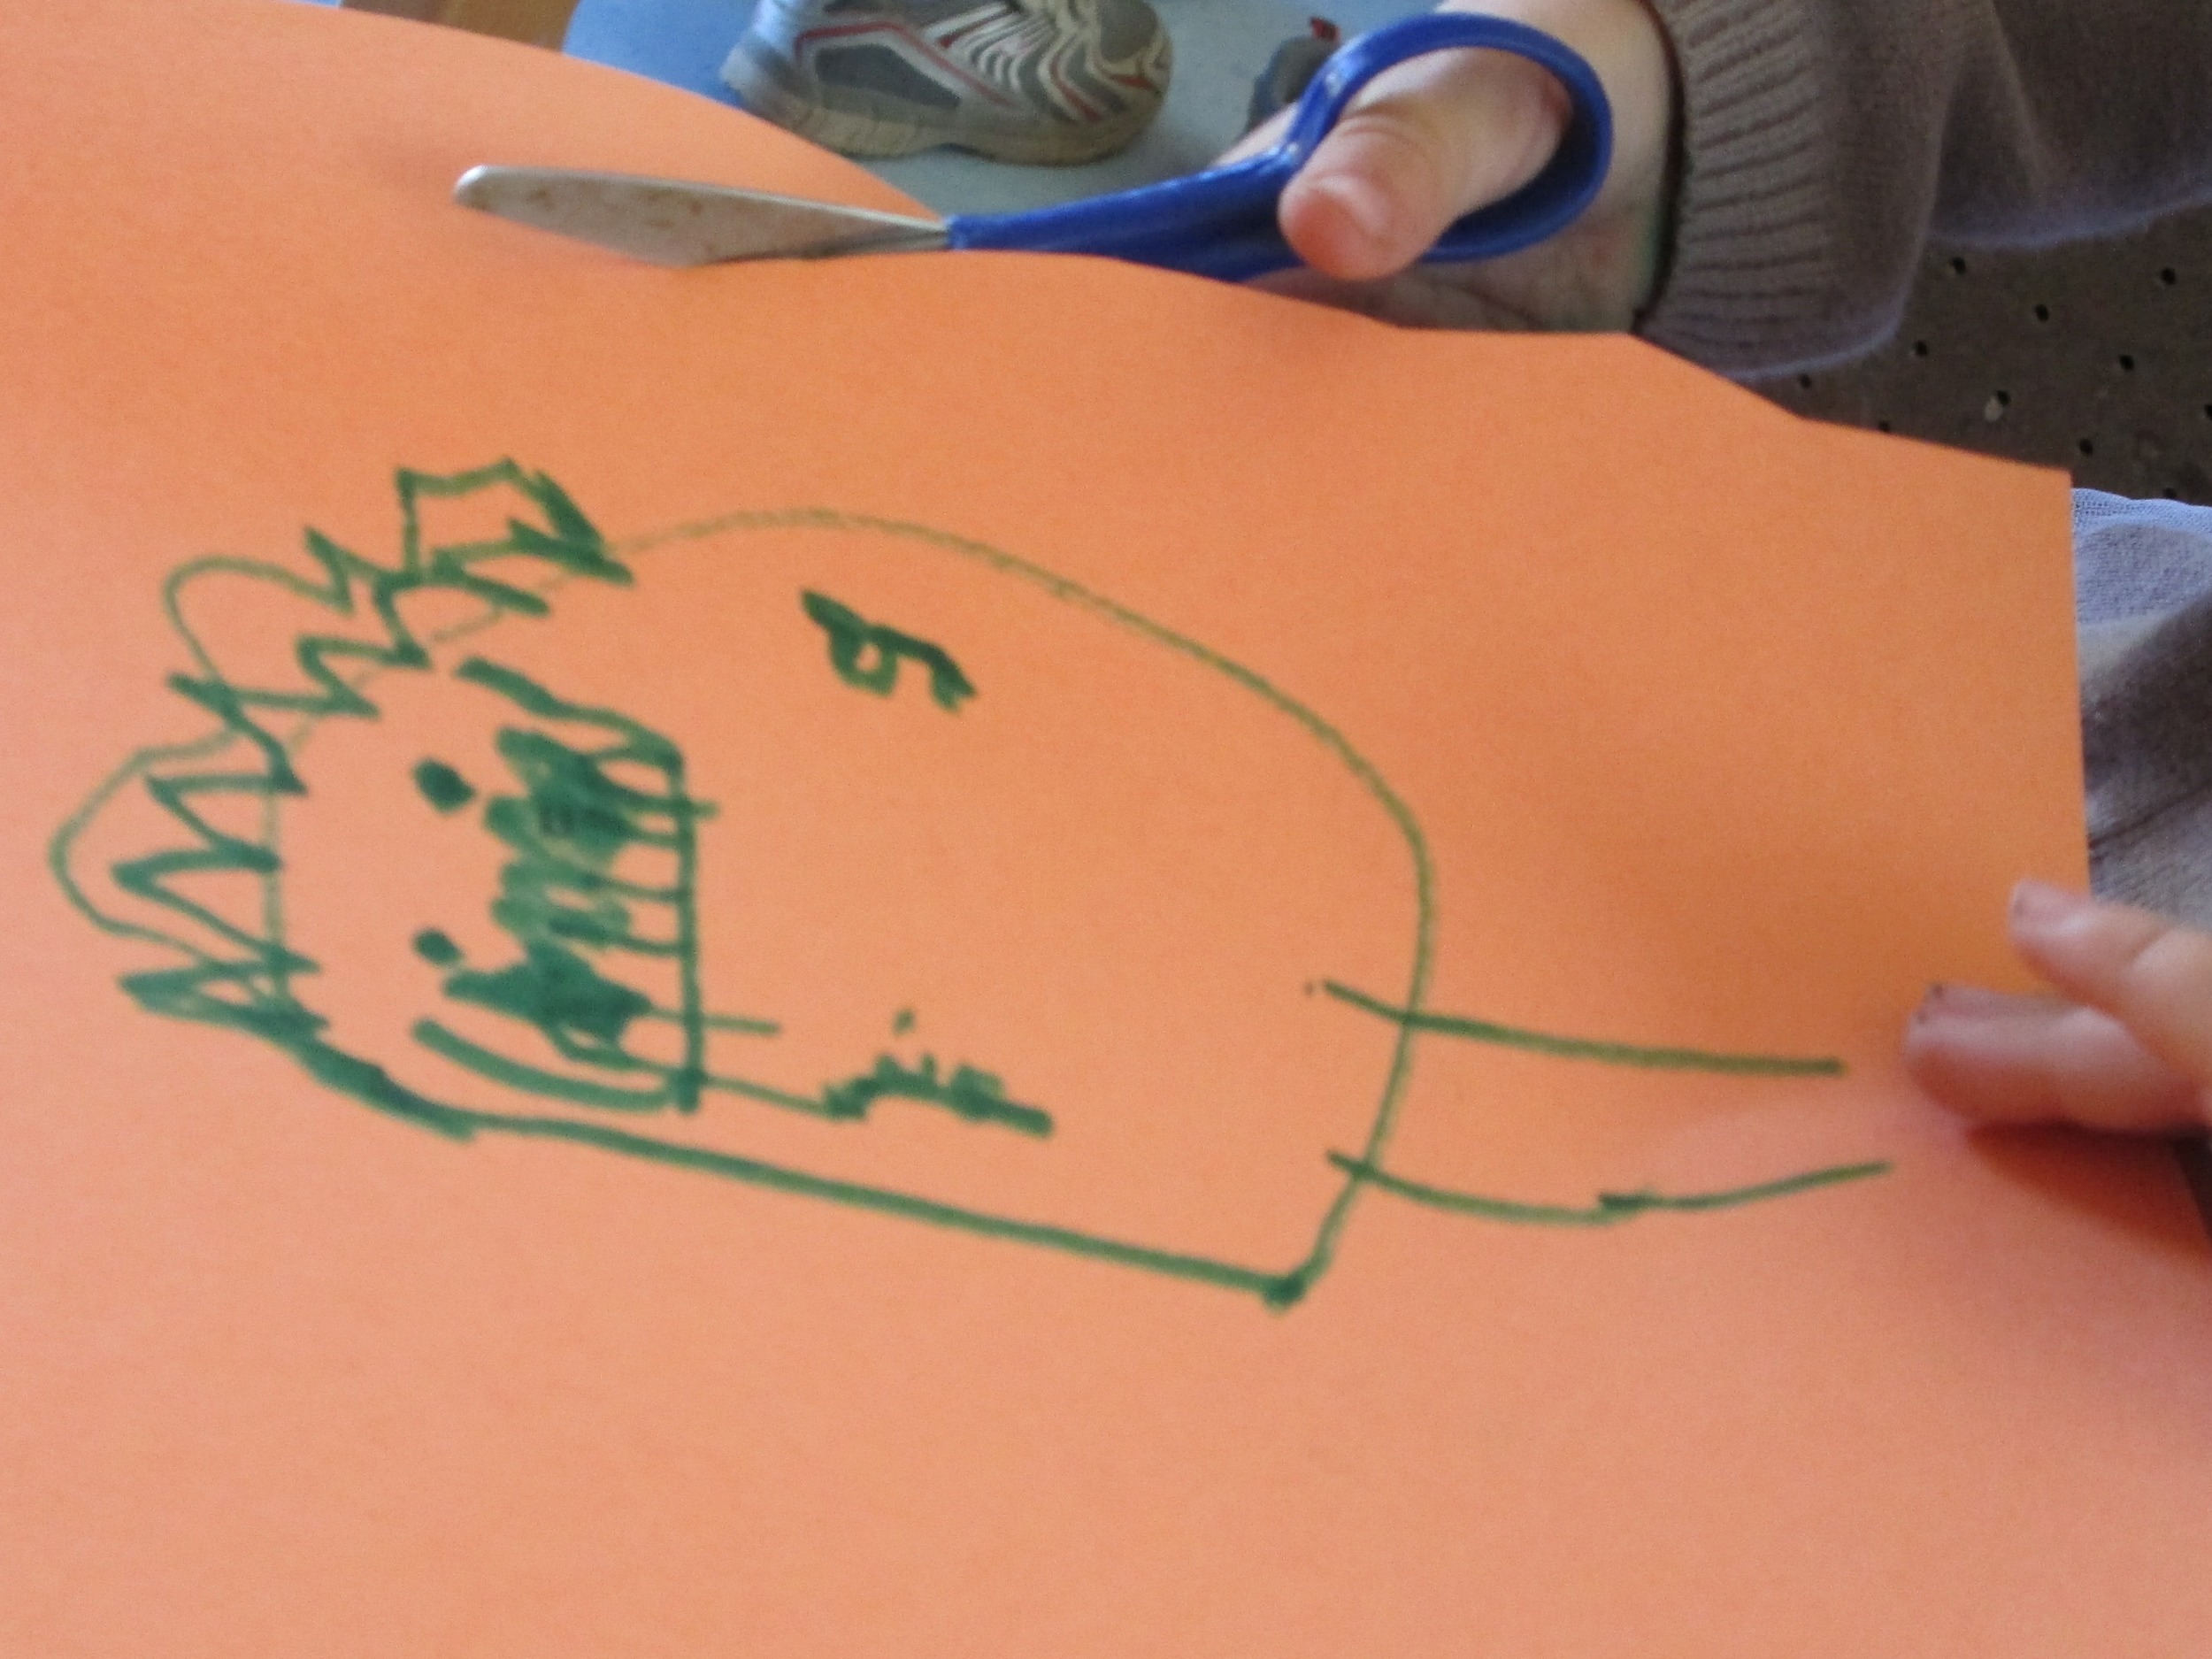 The next day, the kids tried making their own versions of the Big Green Monster book.